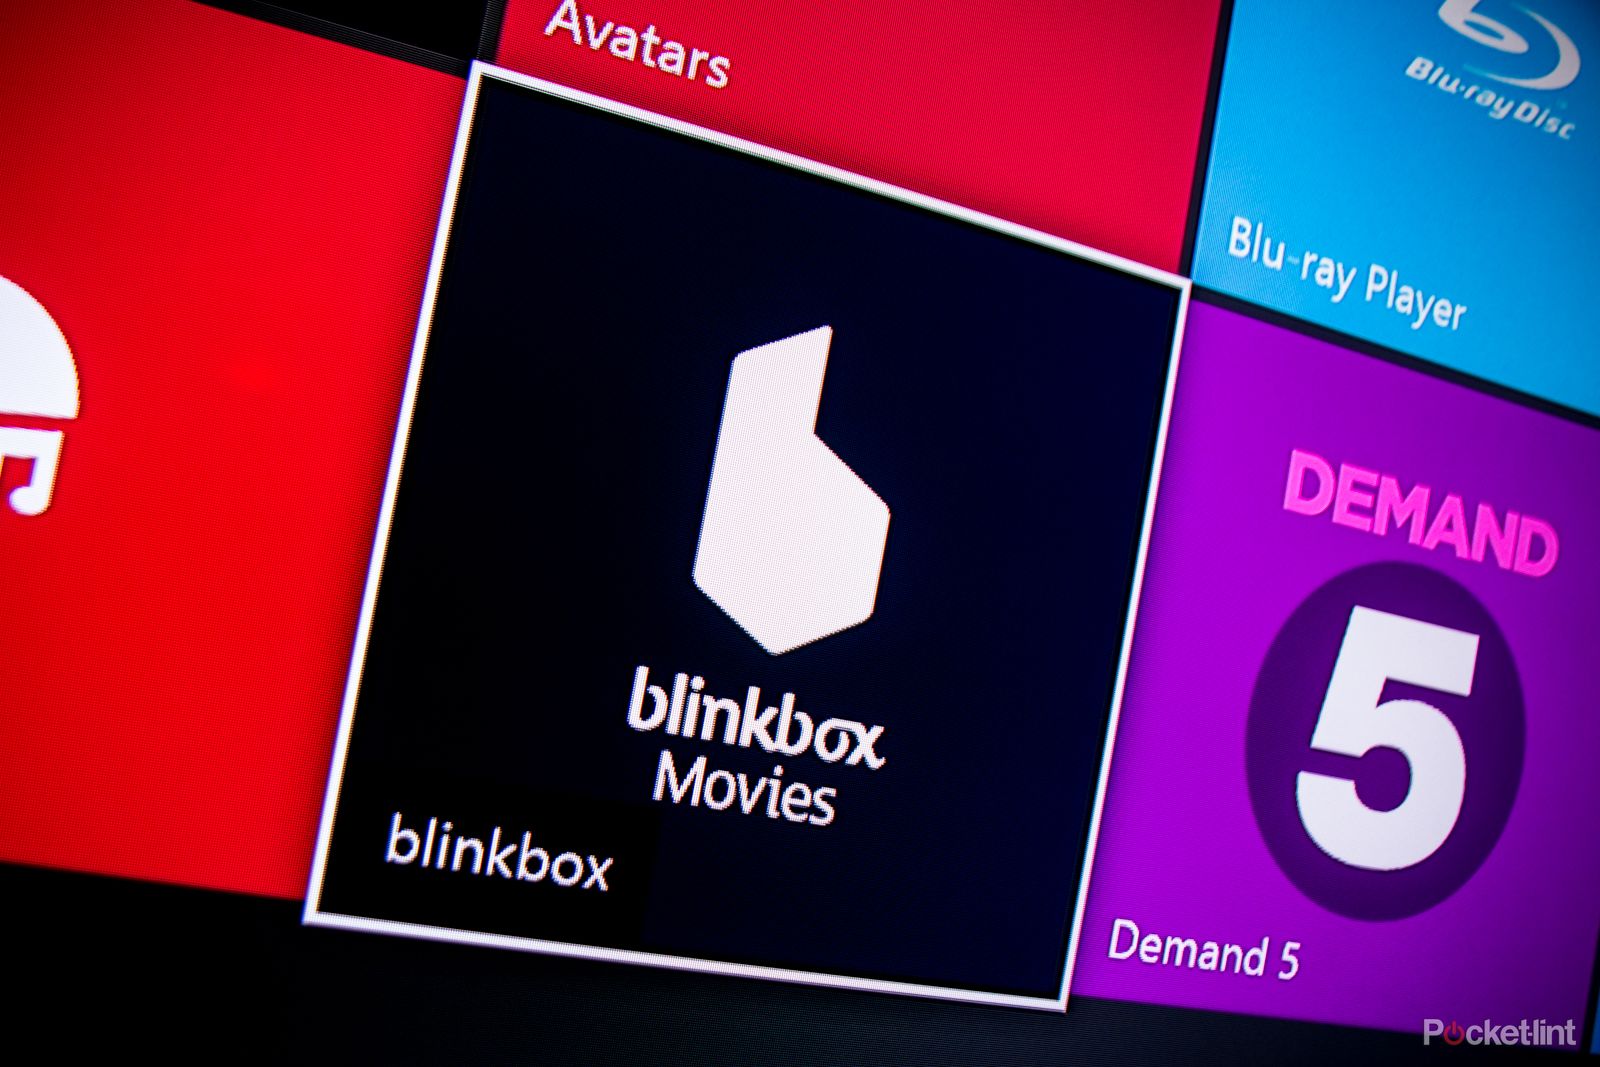 tesco s blinkbox streaming service could end up in the hands of vodafone free to customers  image 1